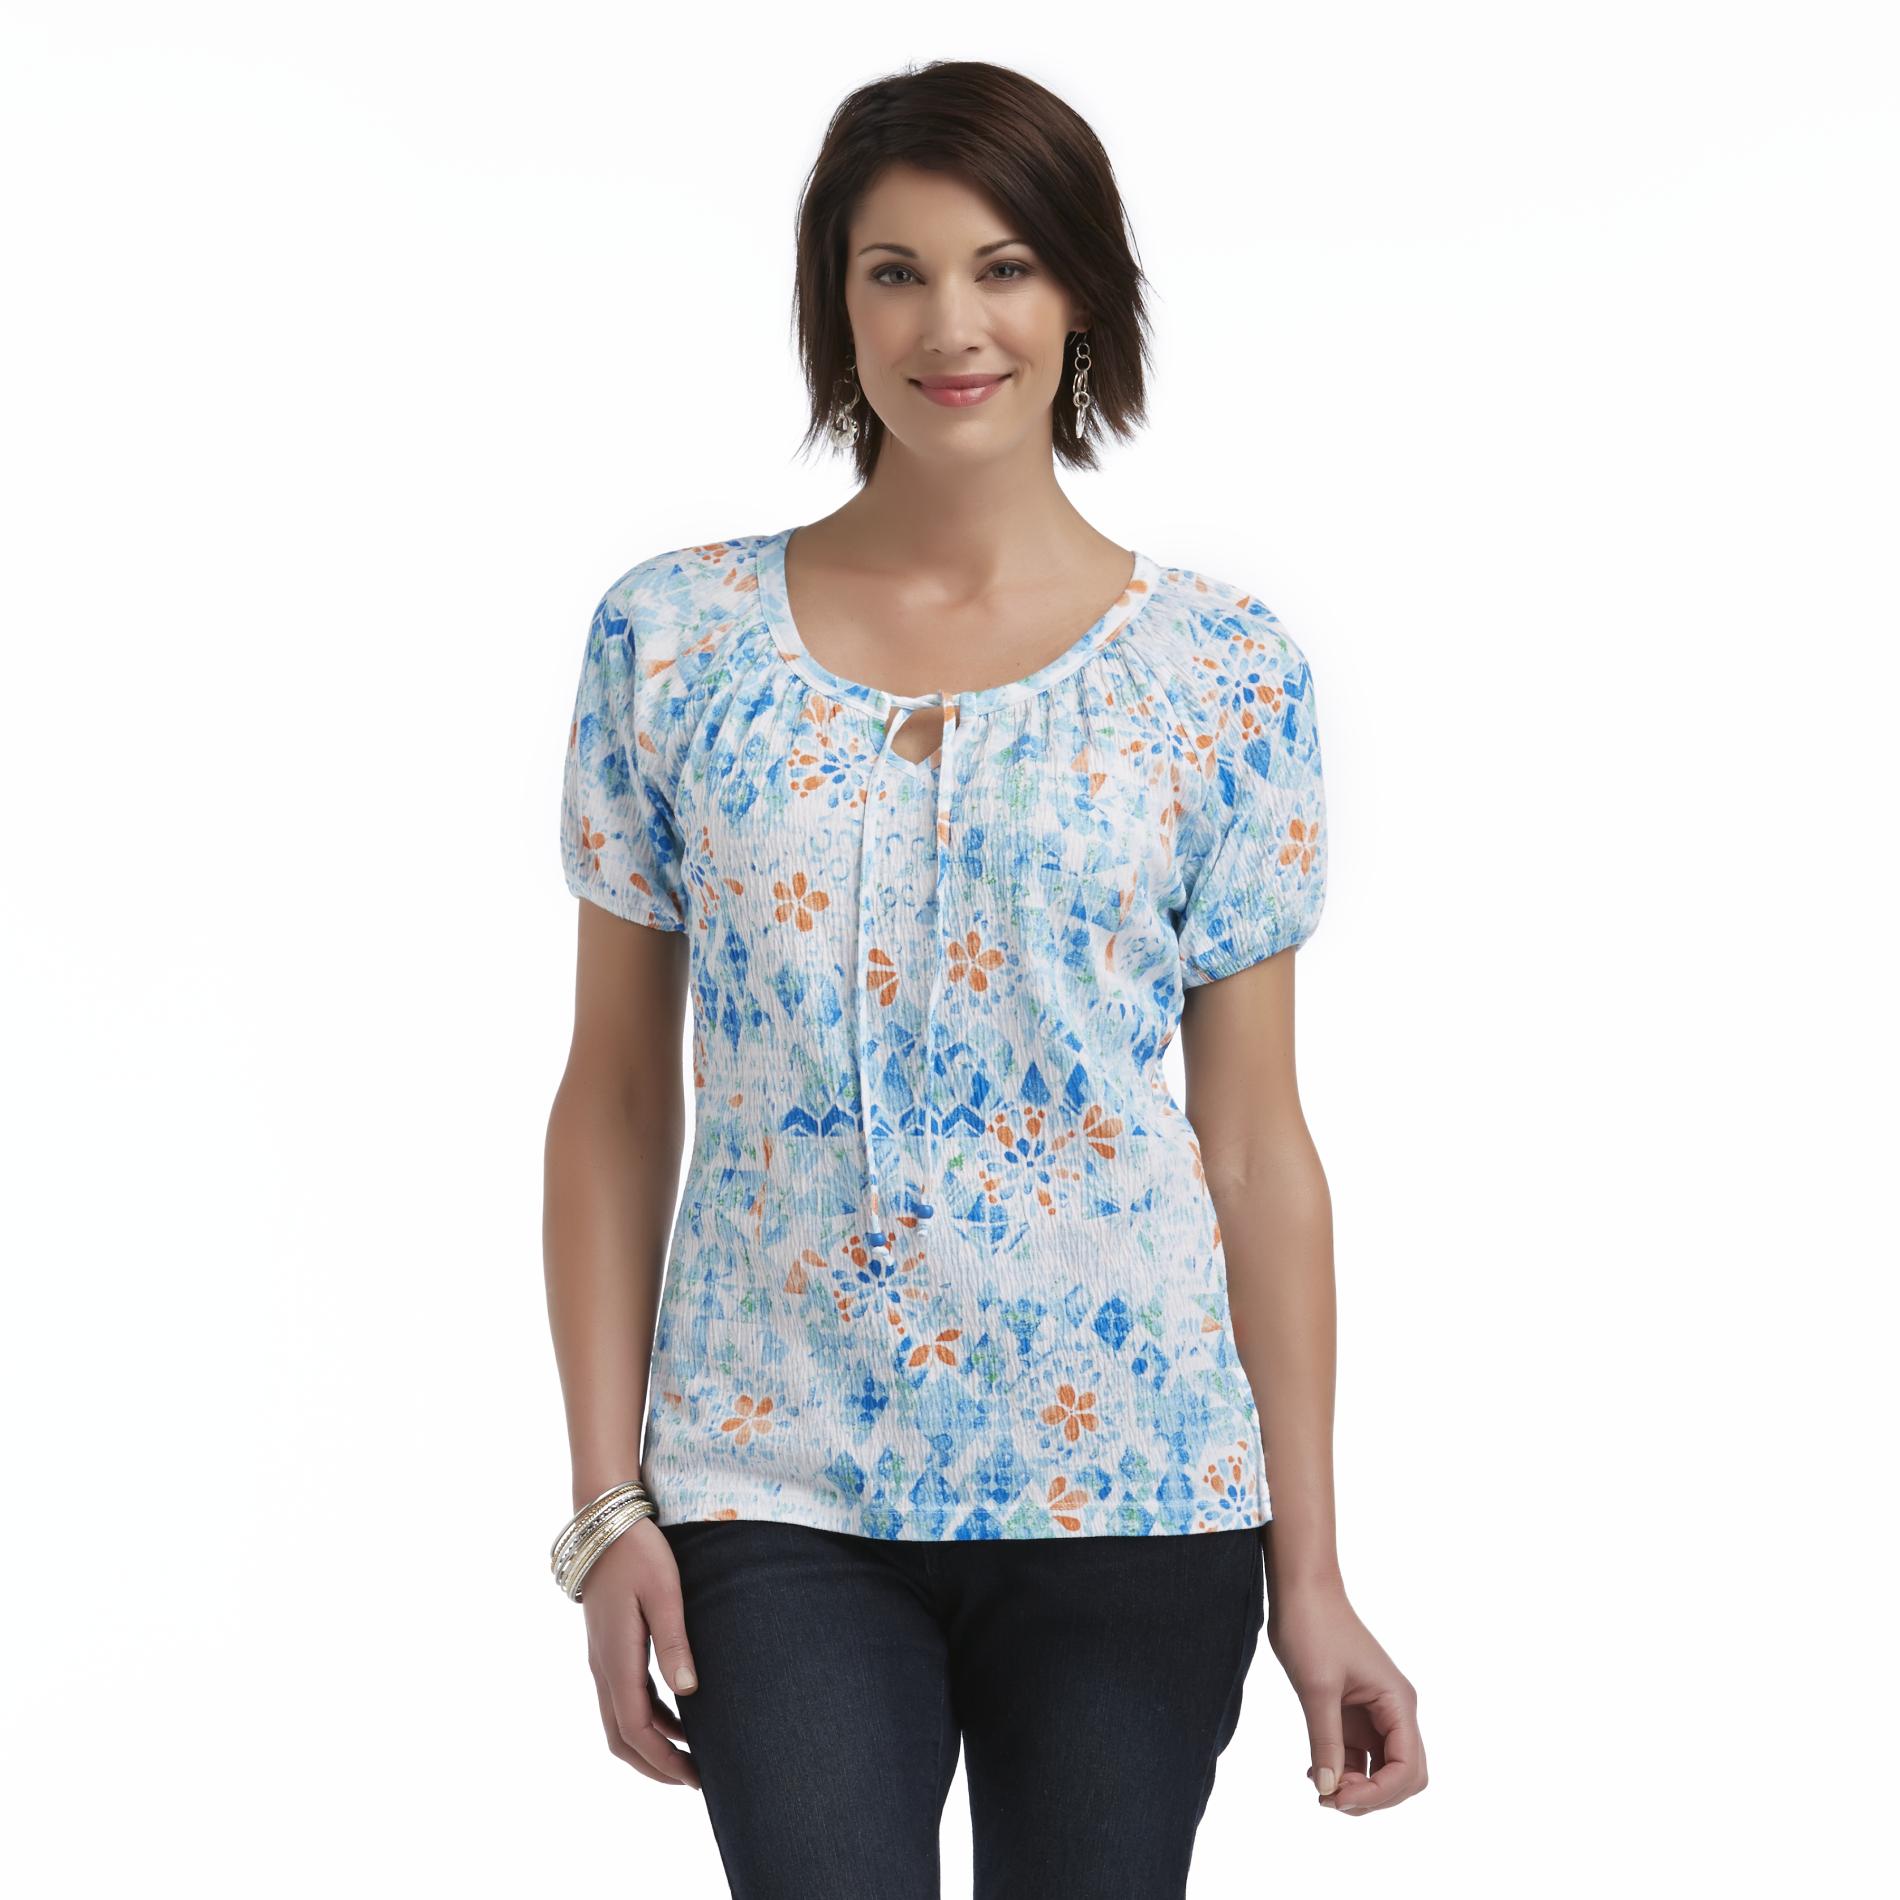 Basic Editions Women's Peasant Crinkle Top - Floral